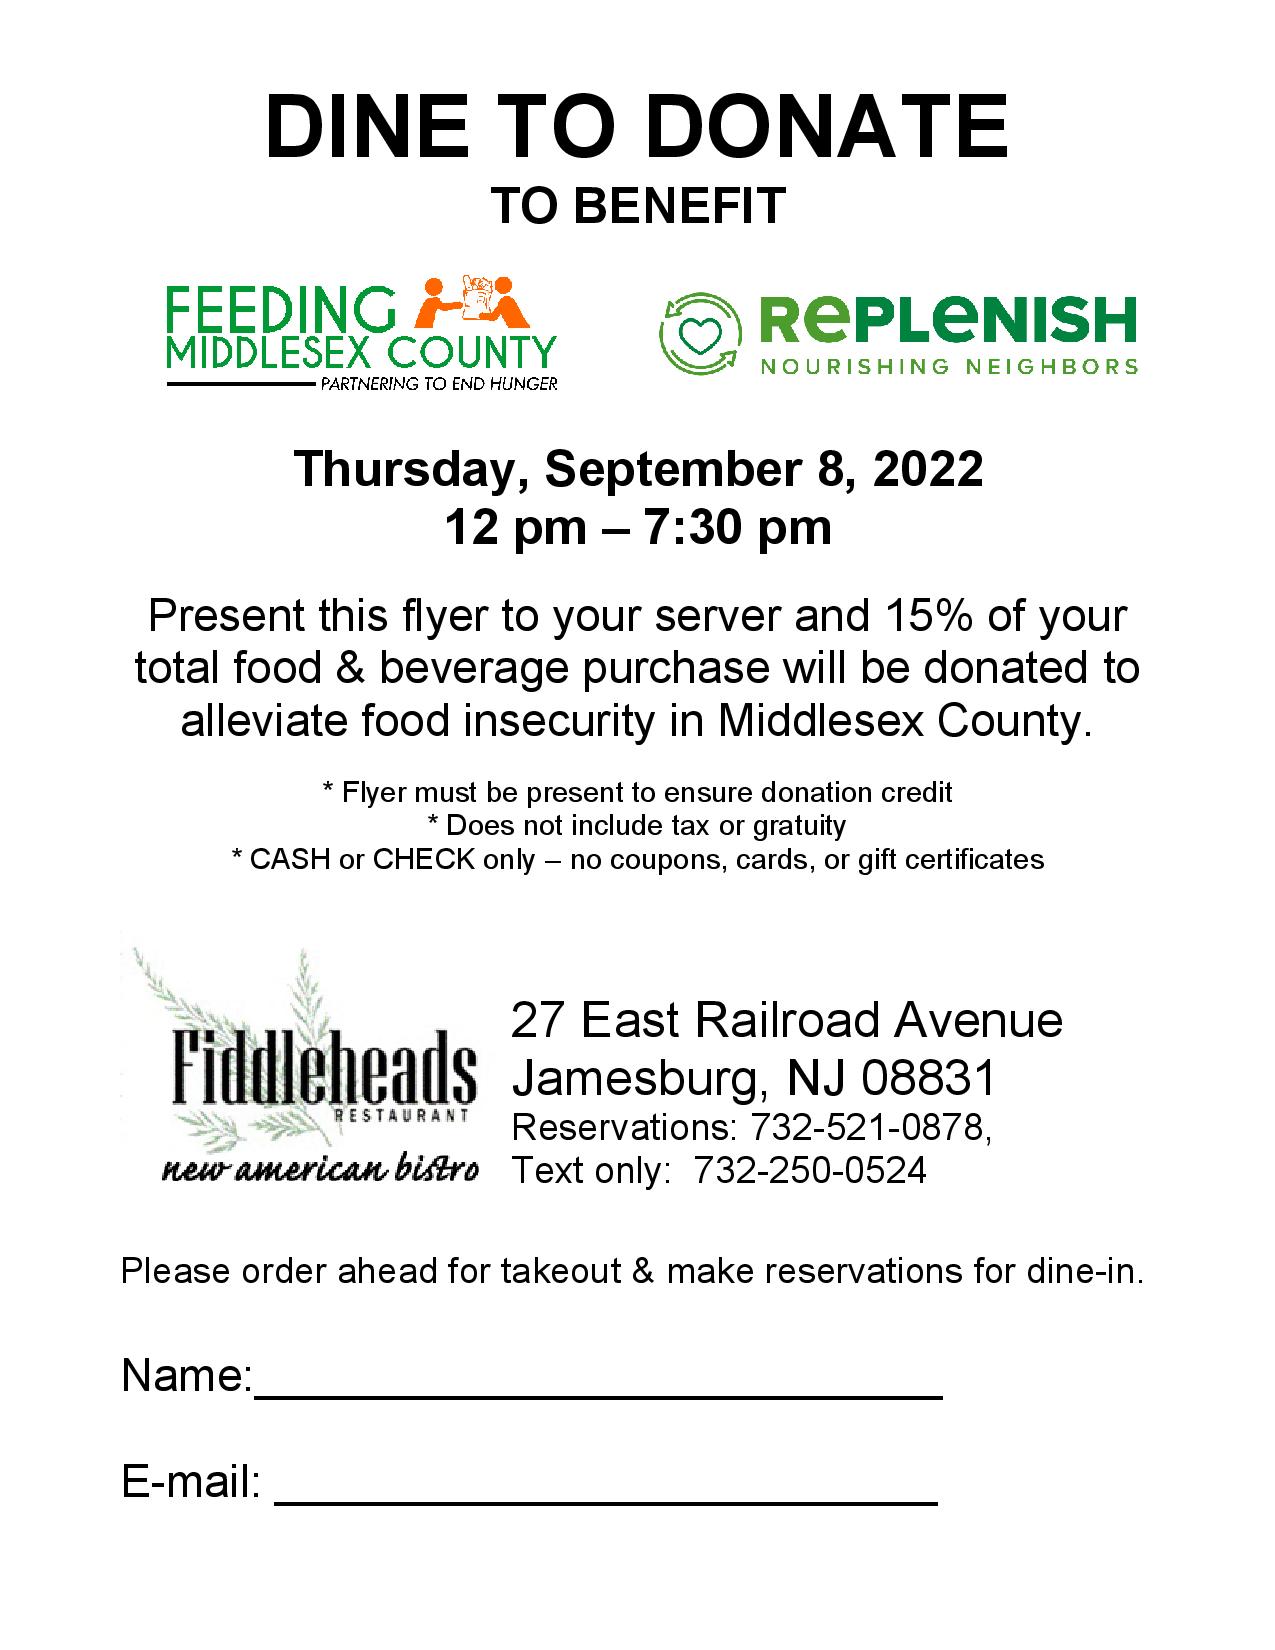 DINE TO DONATE 9 8 22 Fiddleheads page 001